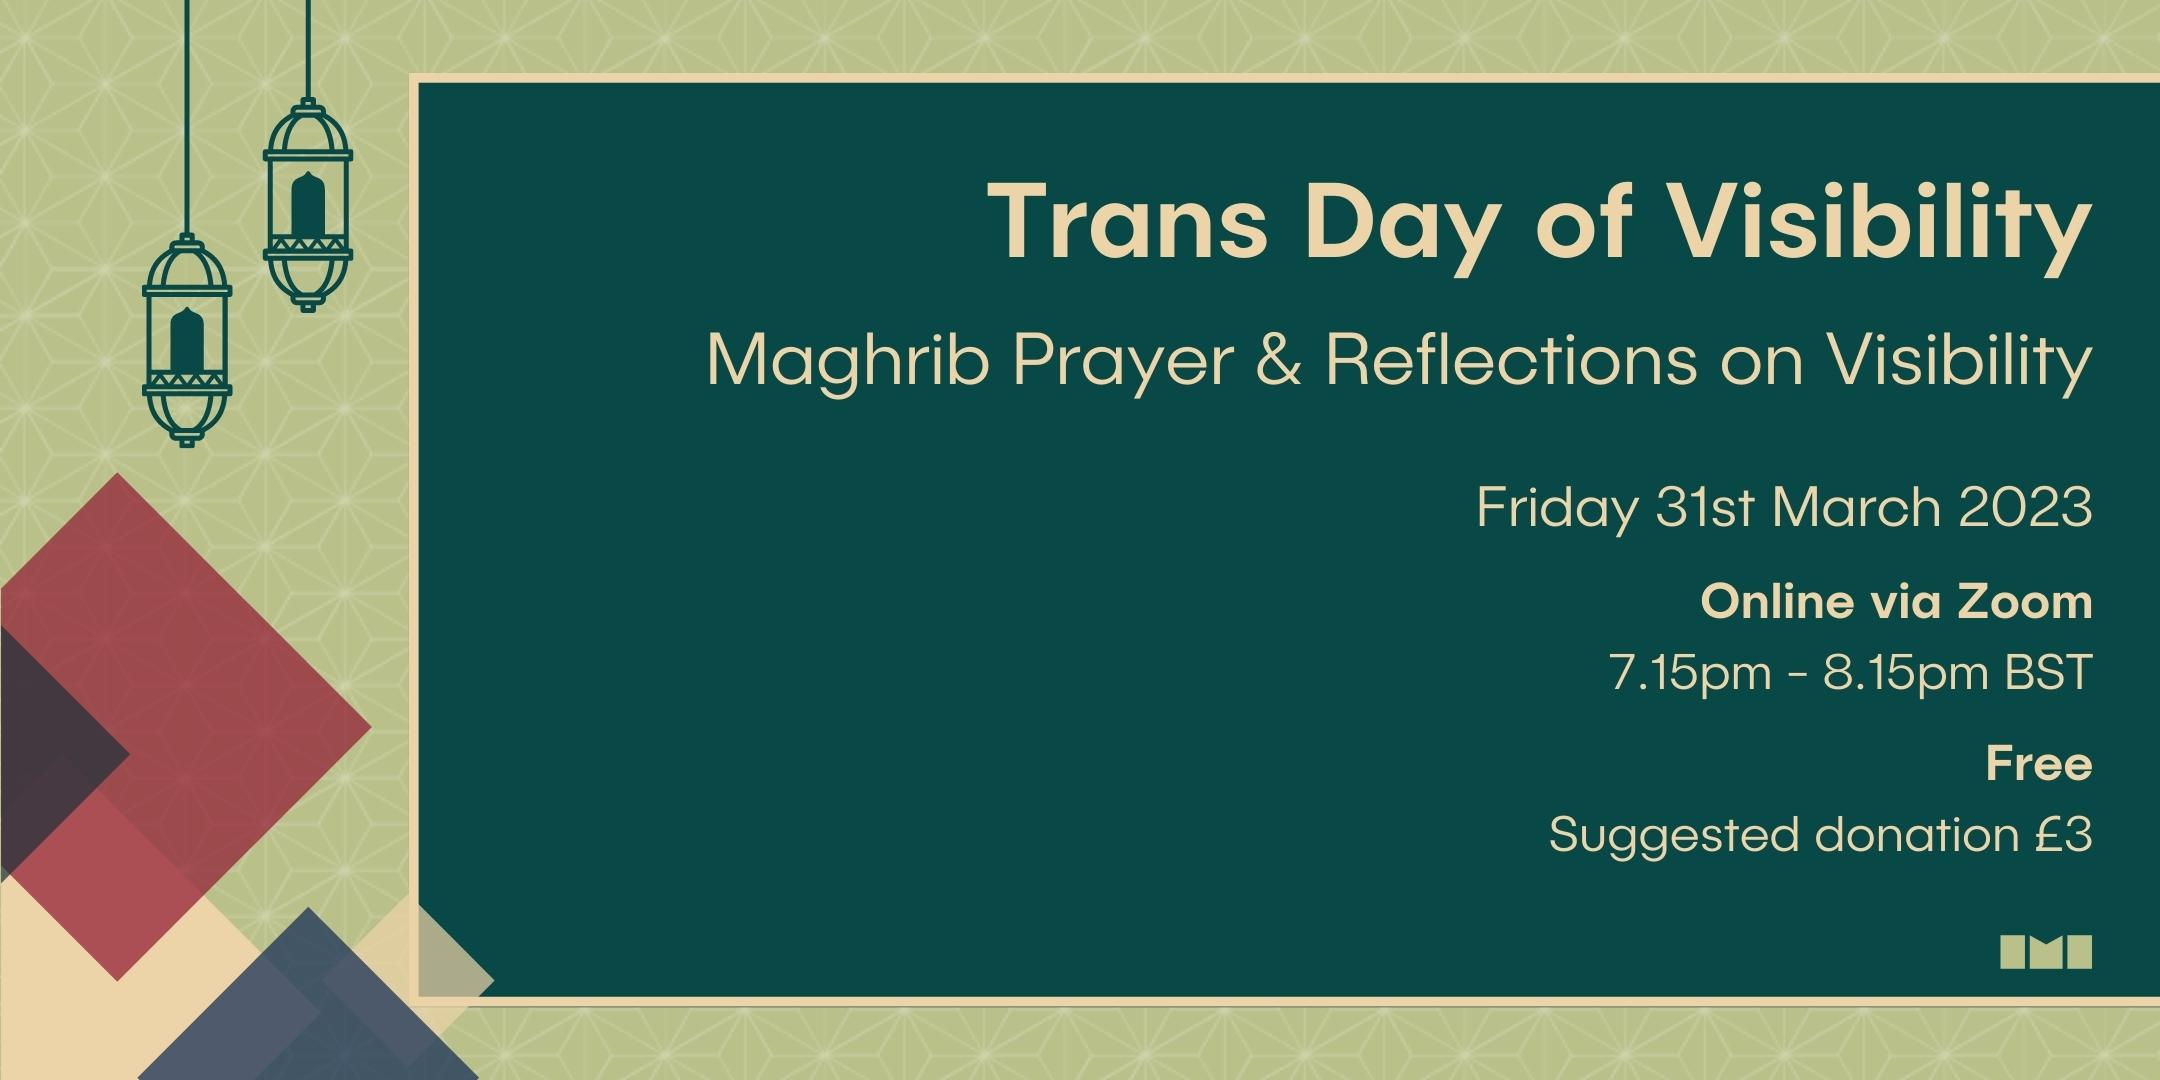 A graphic featuring a dark green rectangle on a light green geometric background with accompanying illustrated lamps and multicoloured squares. Text in the rectangle reads, "Trans Day of Visibility. Maghrib Prayer and Reflections on Visibility. Friday 31st March 2023. Online via Zoom. 7.15pm - 8.15pm BST. Free, suggested donation £3."